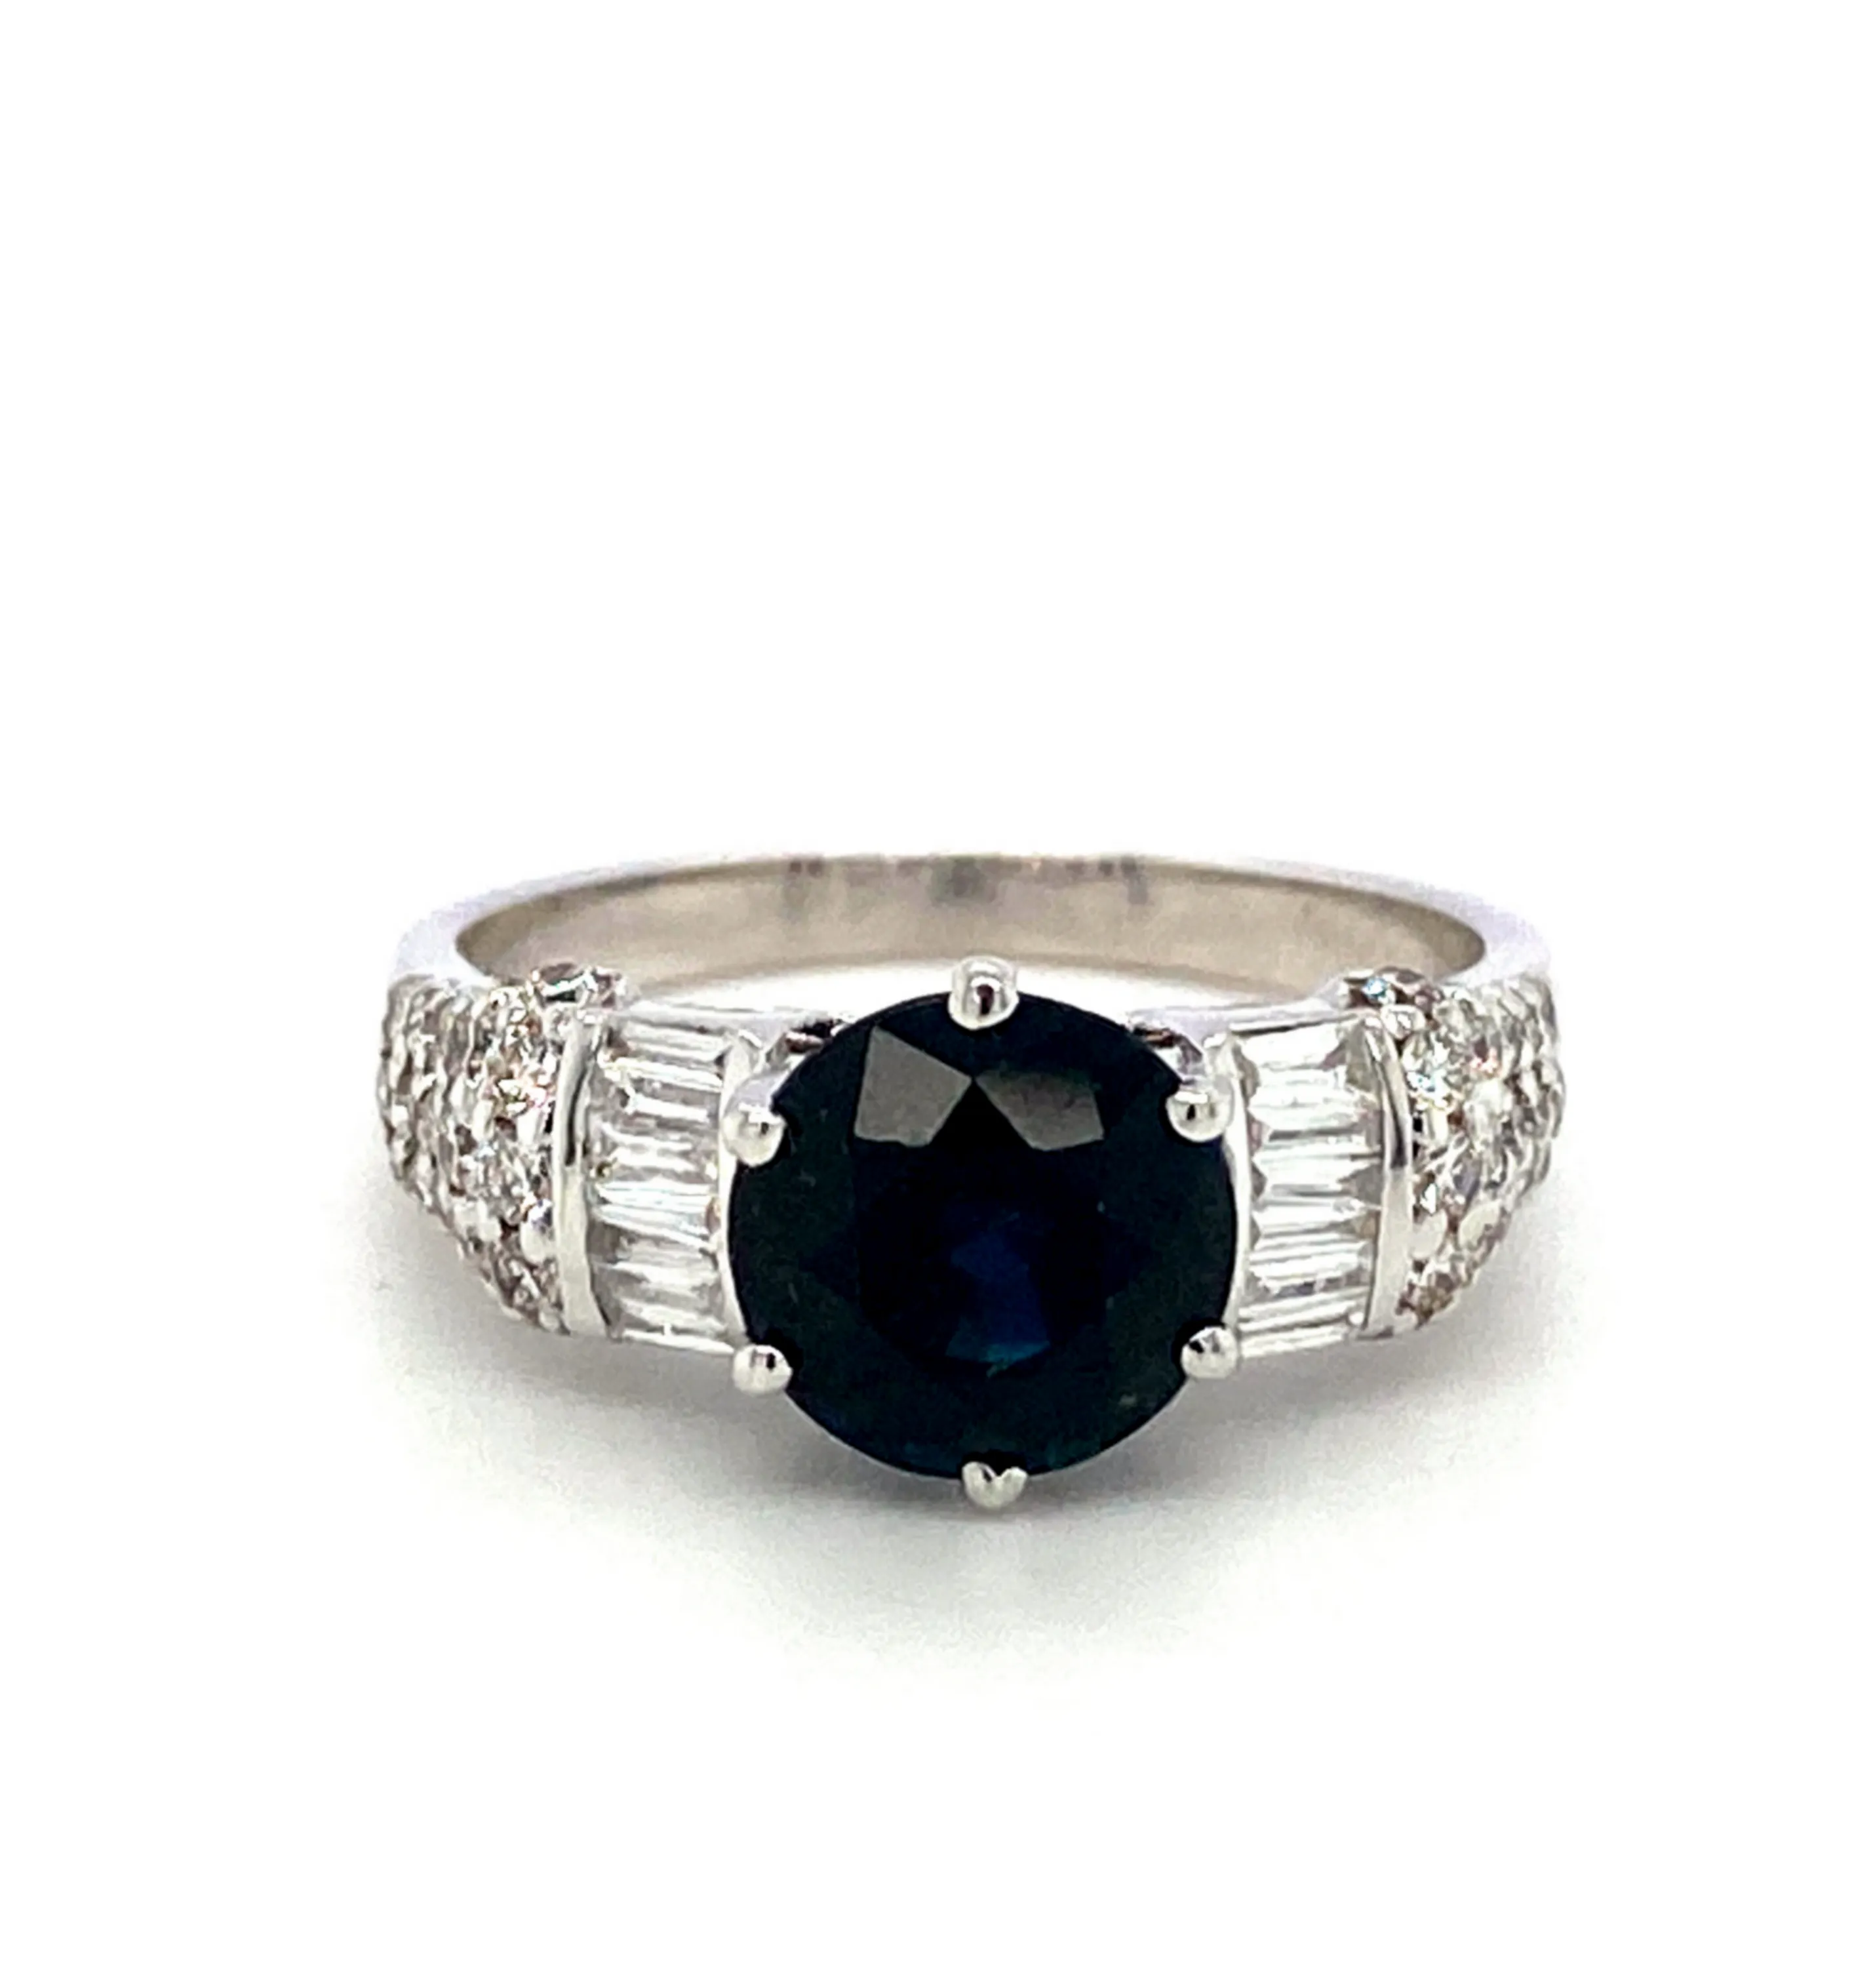 Dark Blue Luxury Sapphire with Diamonds Wedding Ring for Women Royal Engagement Ring in 18K White Gold Antique Gemstone jewelry